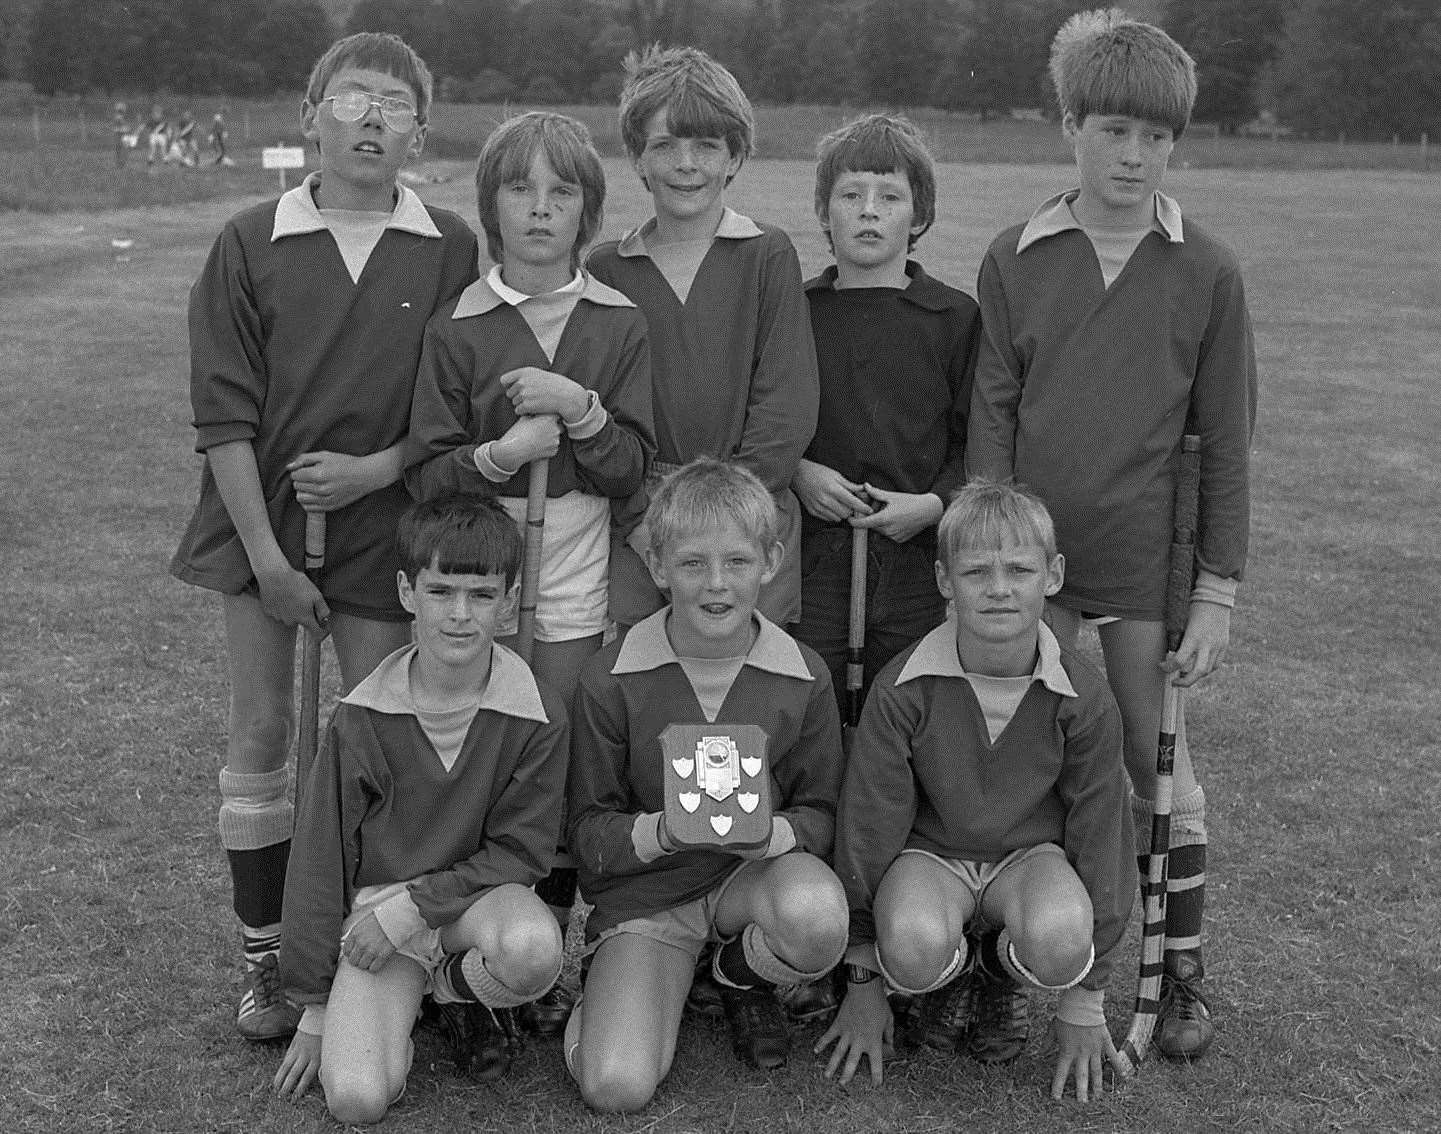 Do you recognise anyone?